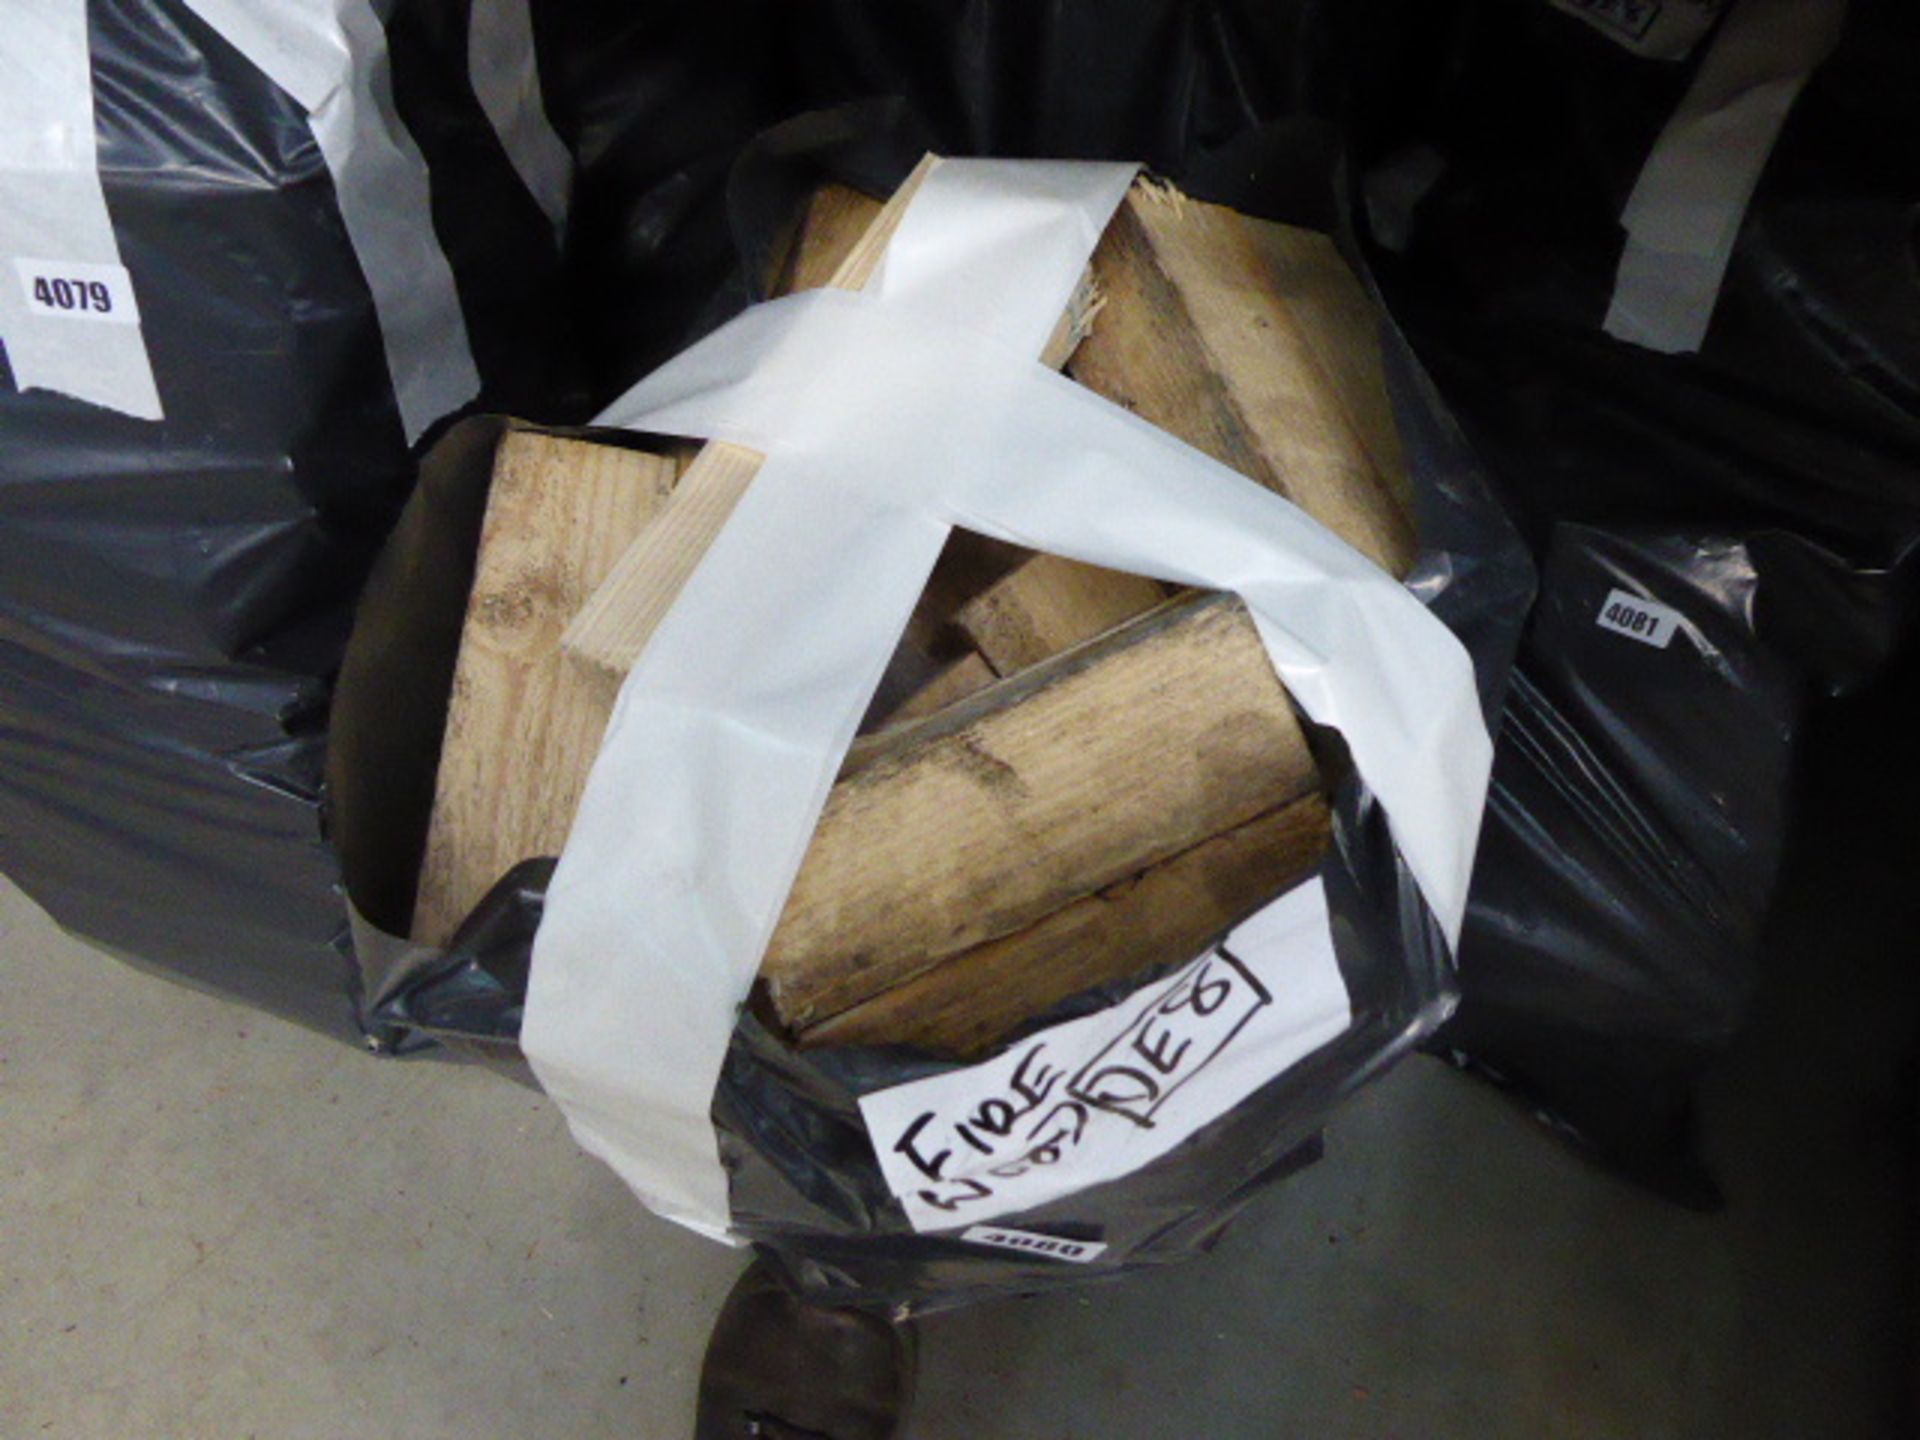 Four bags of kindling